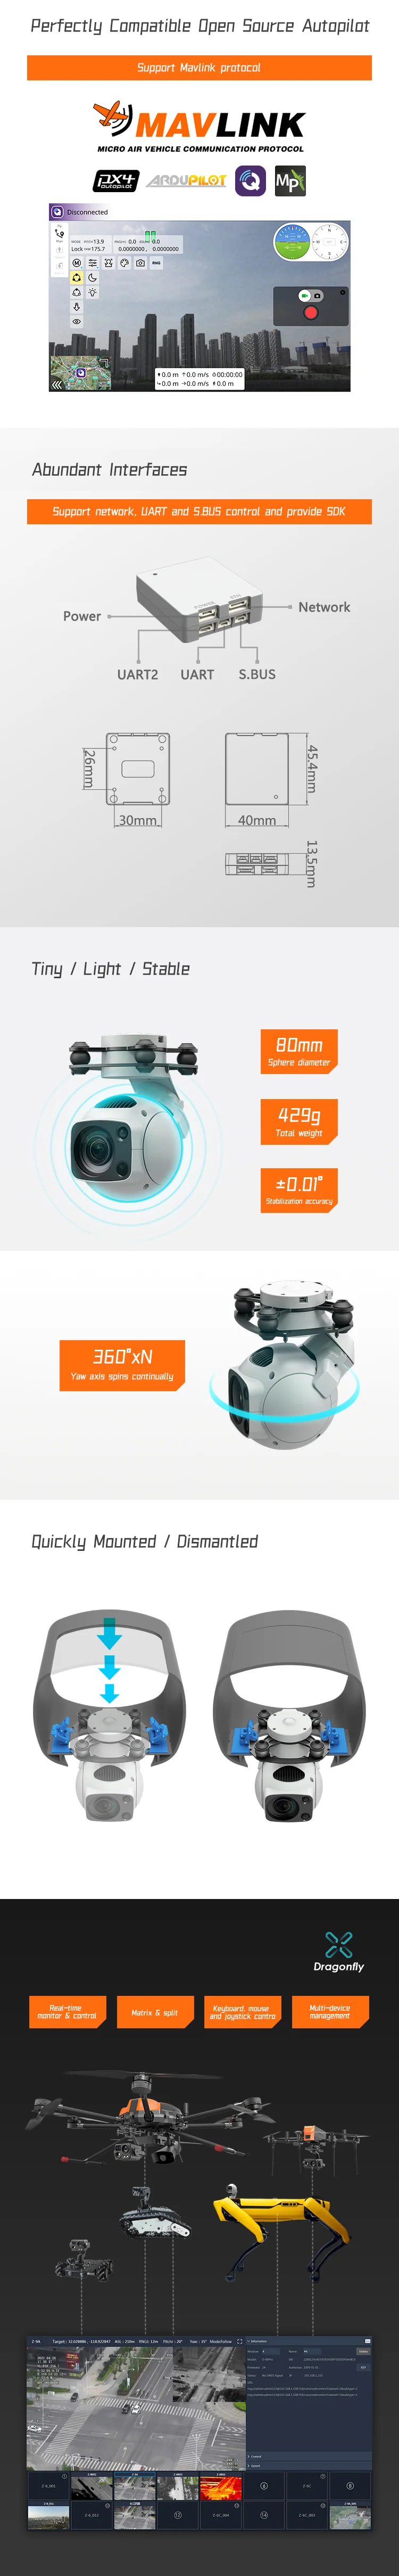 XF D-80AI 30x Zoom Camera Dual Field Of View 3 Axis Night Vision Camera Gimbal Target Tracking